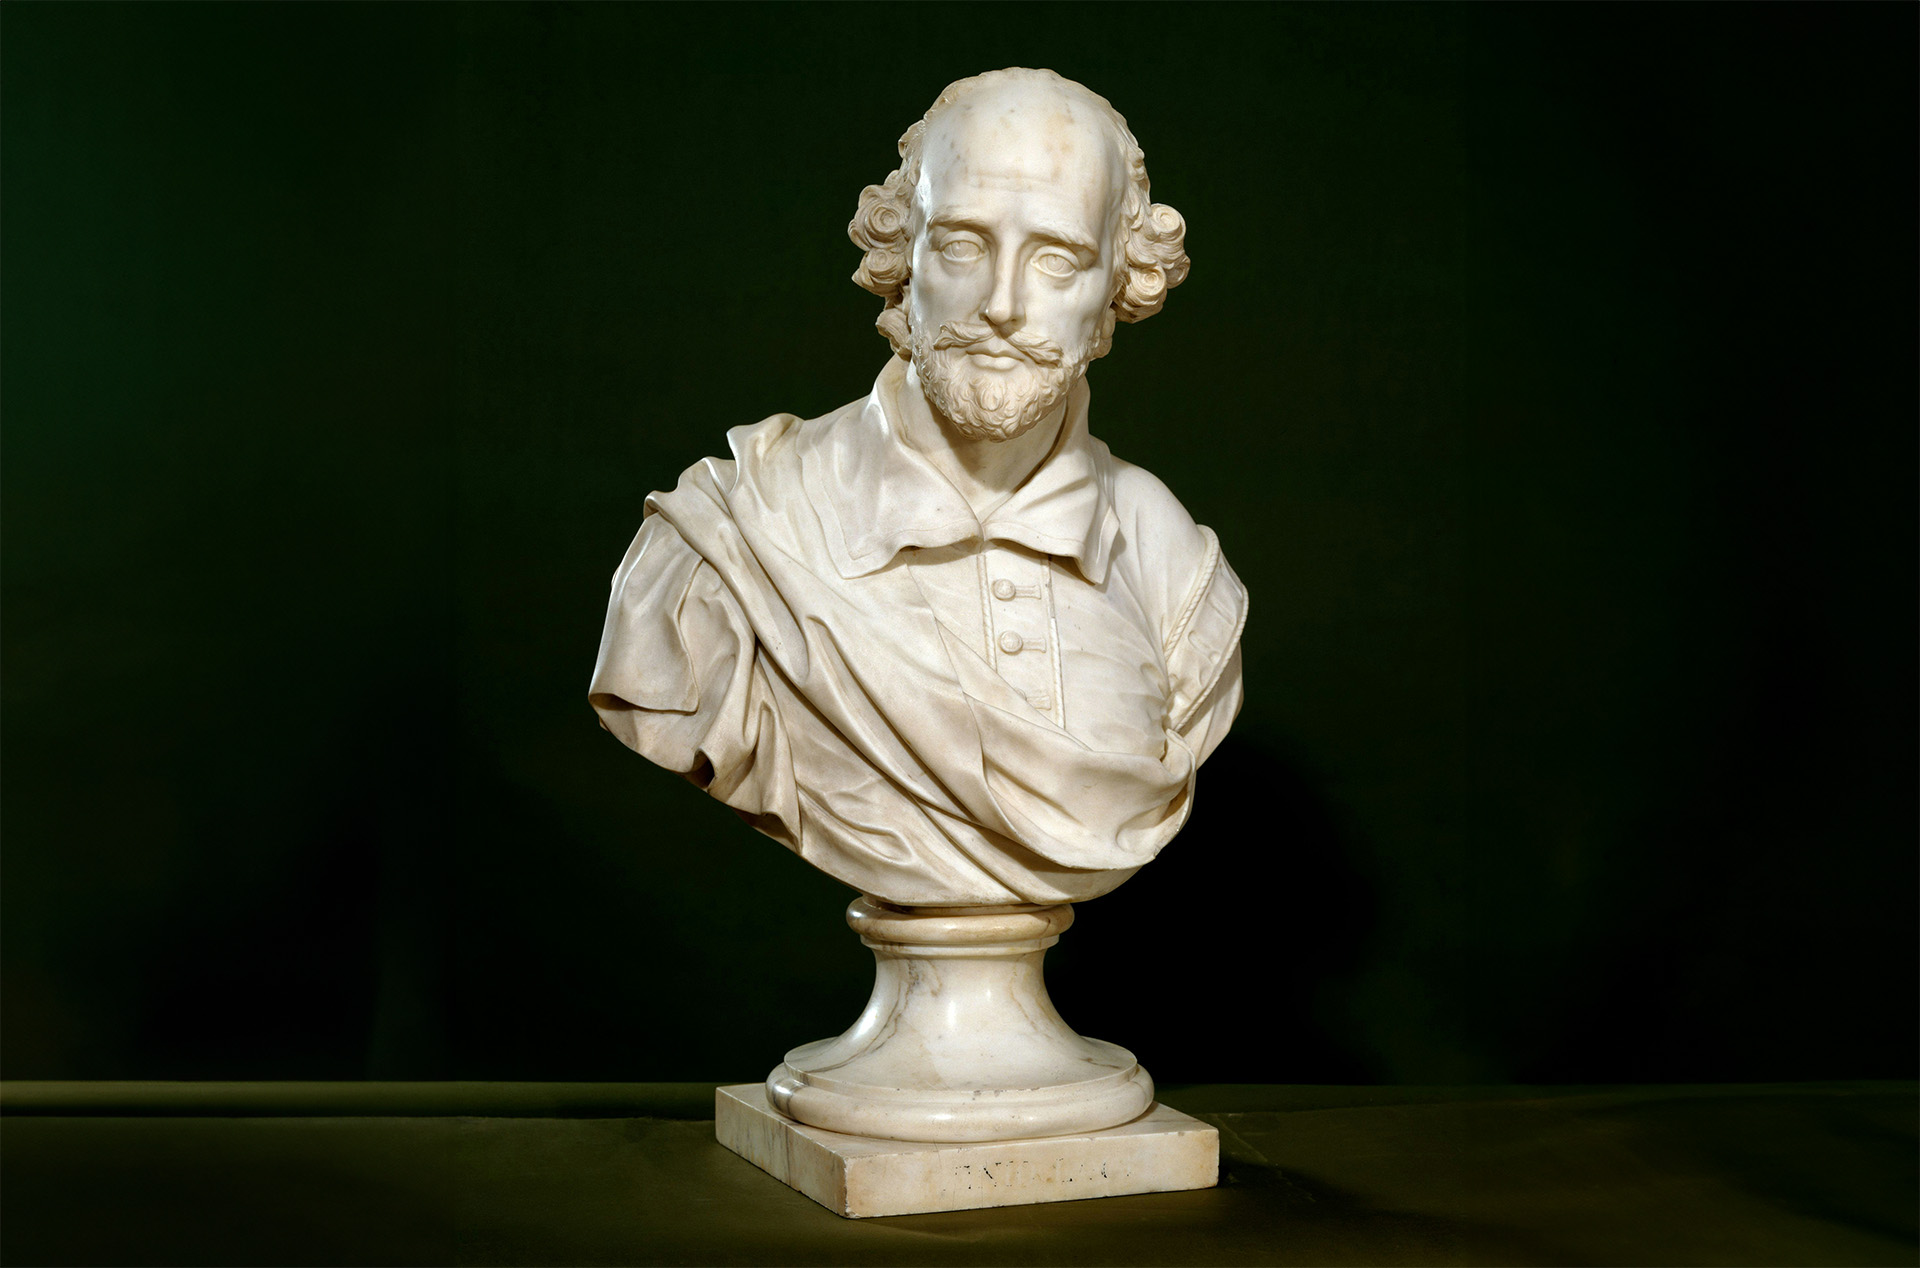 A Bust Of William Shakespeare